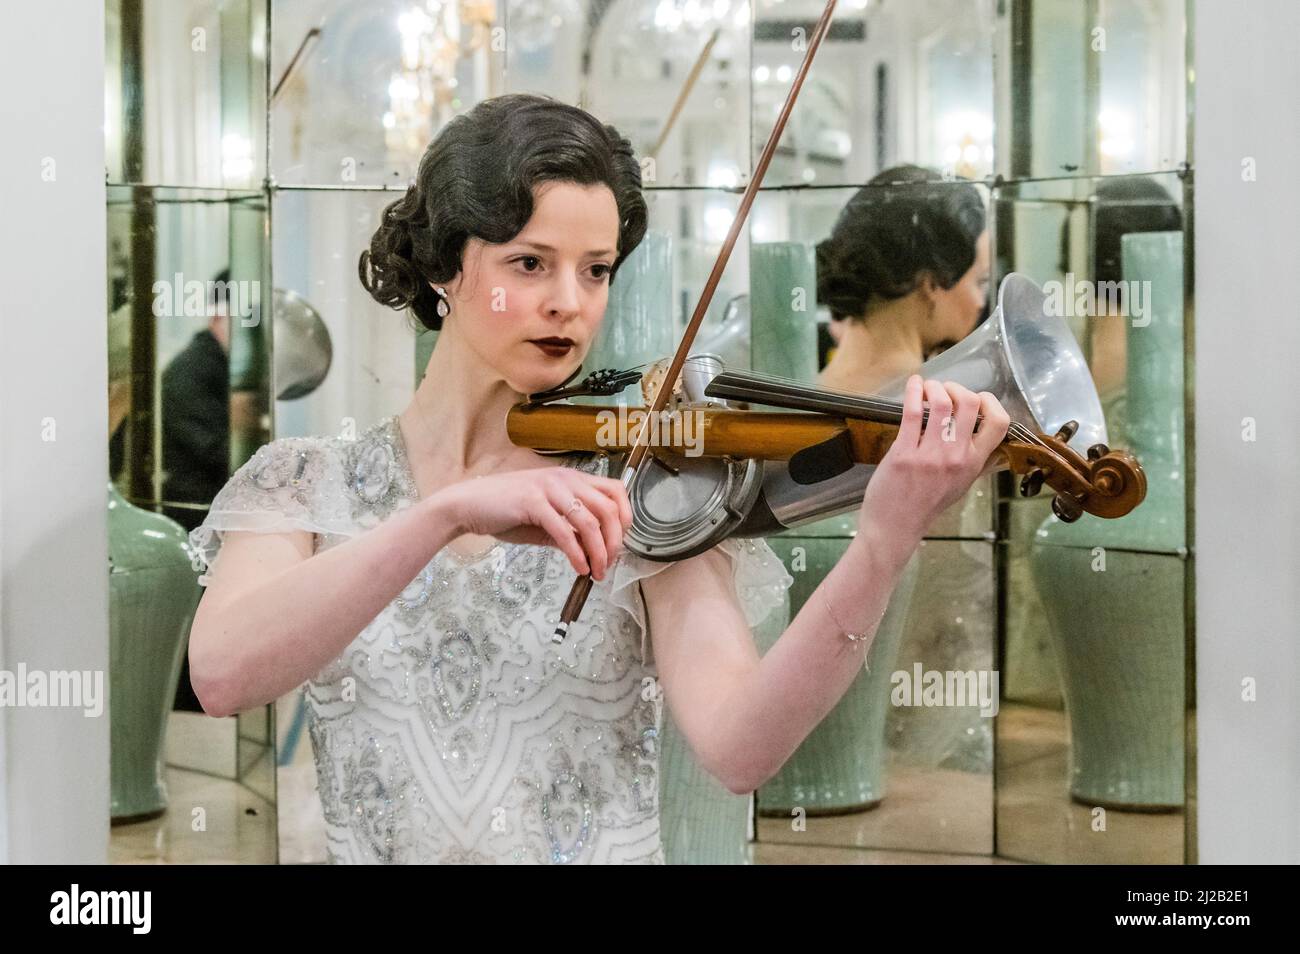 London, UK. 31 Mar 2022. Rebecca Smith plays the Stroh violin in a replica vintage dress - The Savoy combines forces with Alex Mendham and his orchestra to raise funds for Ukraine. In the 1920s and 1930s the Savoy Orpheans were a household name, and for this charitable collaboration, the orchestra will become ‘The New Savoy Orpheans', and create an exclusive recording in the hotel. They play in the hotel's Lancaster Ballroom, to record a medley of pieces that represent the finest melodies of the Jazz Age with the intention of raising valuable funds for the Disasters Emergency Committee. Cr Stock Photo